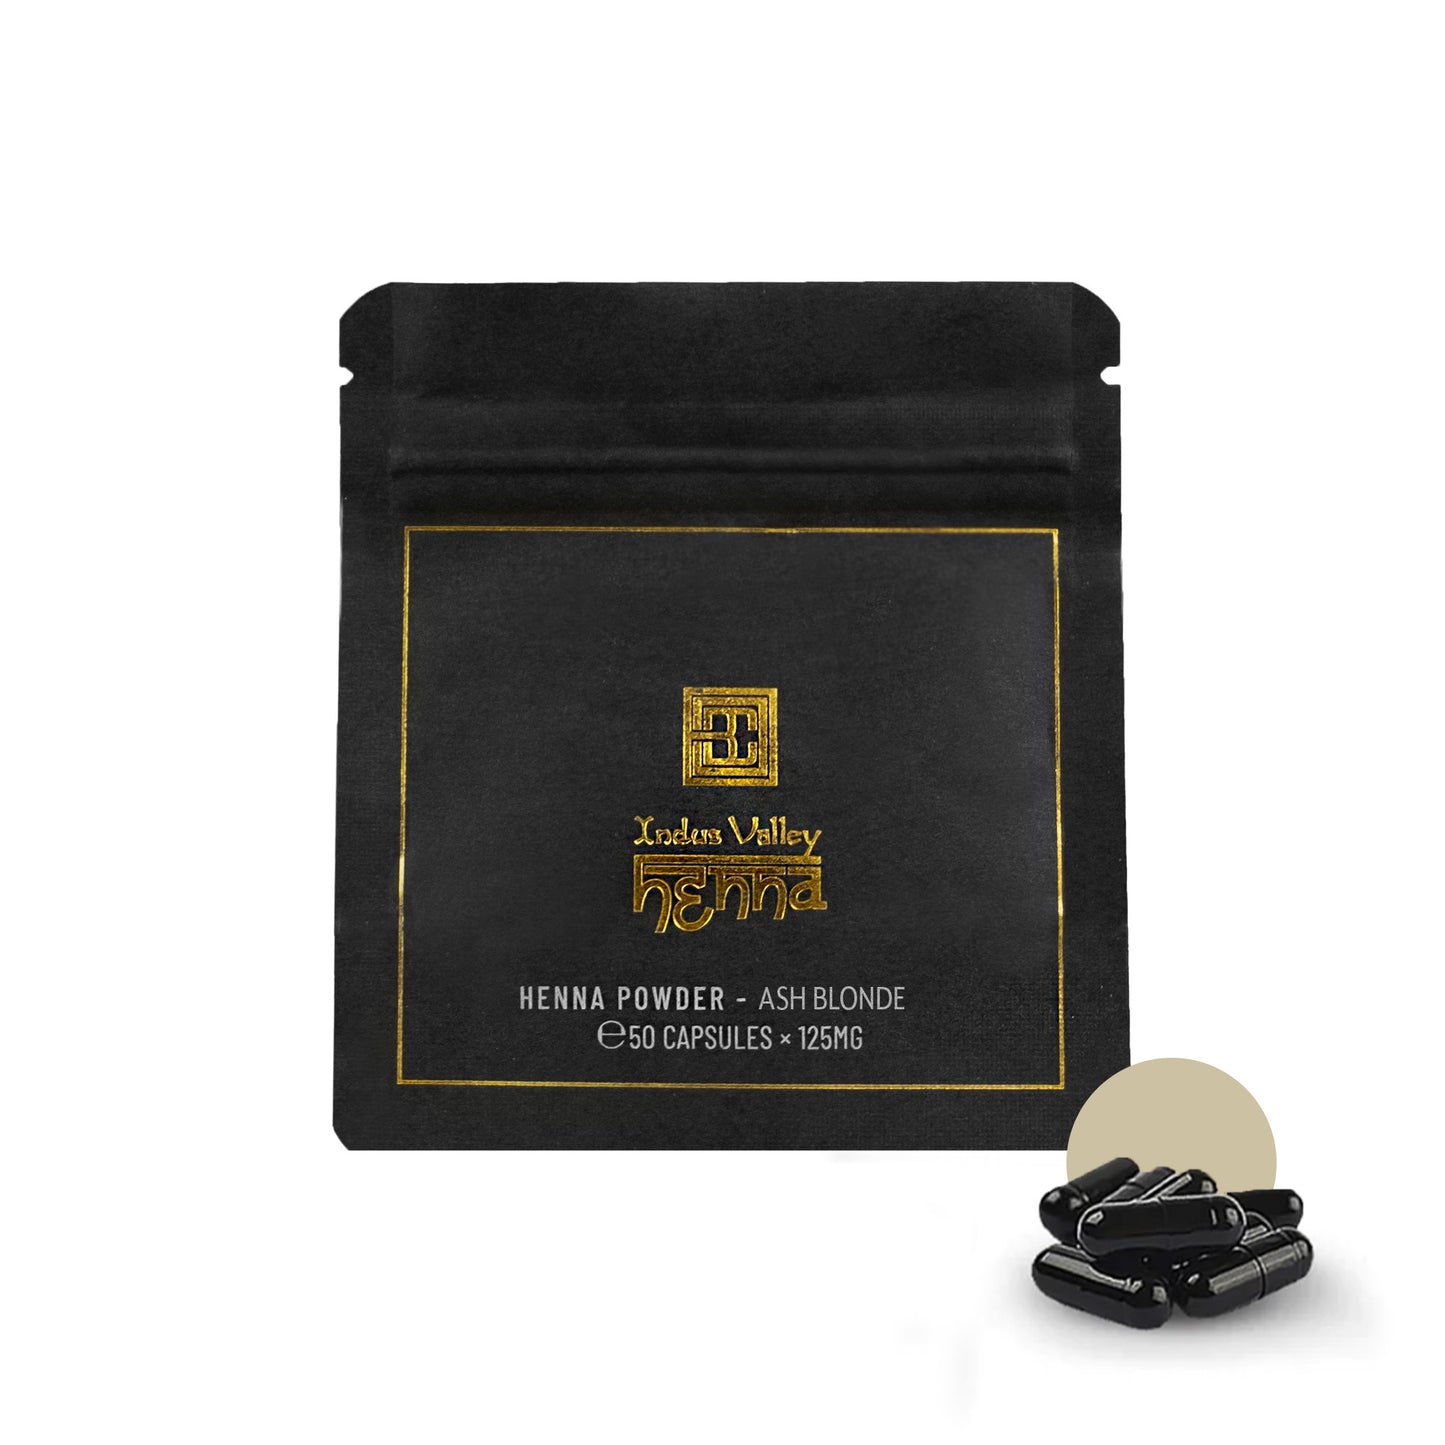 Brow Henna Powder capsules Color-Ash-Blonde alongside packaging against a white background